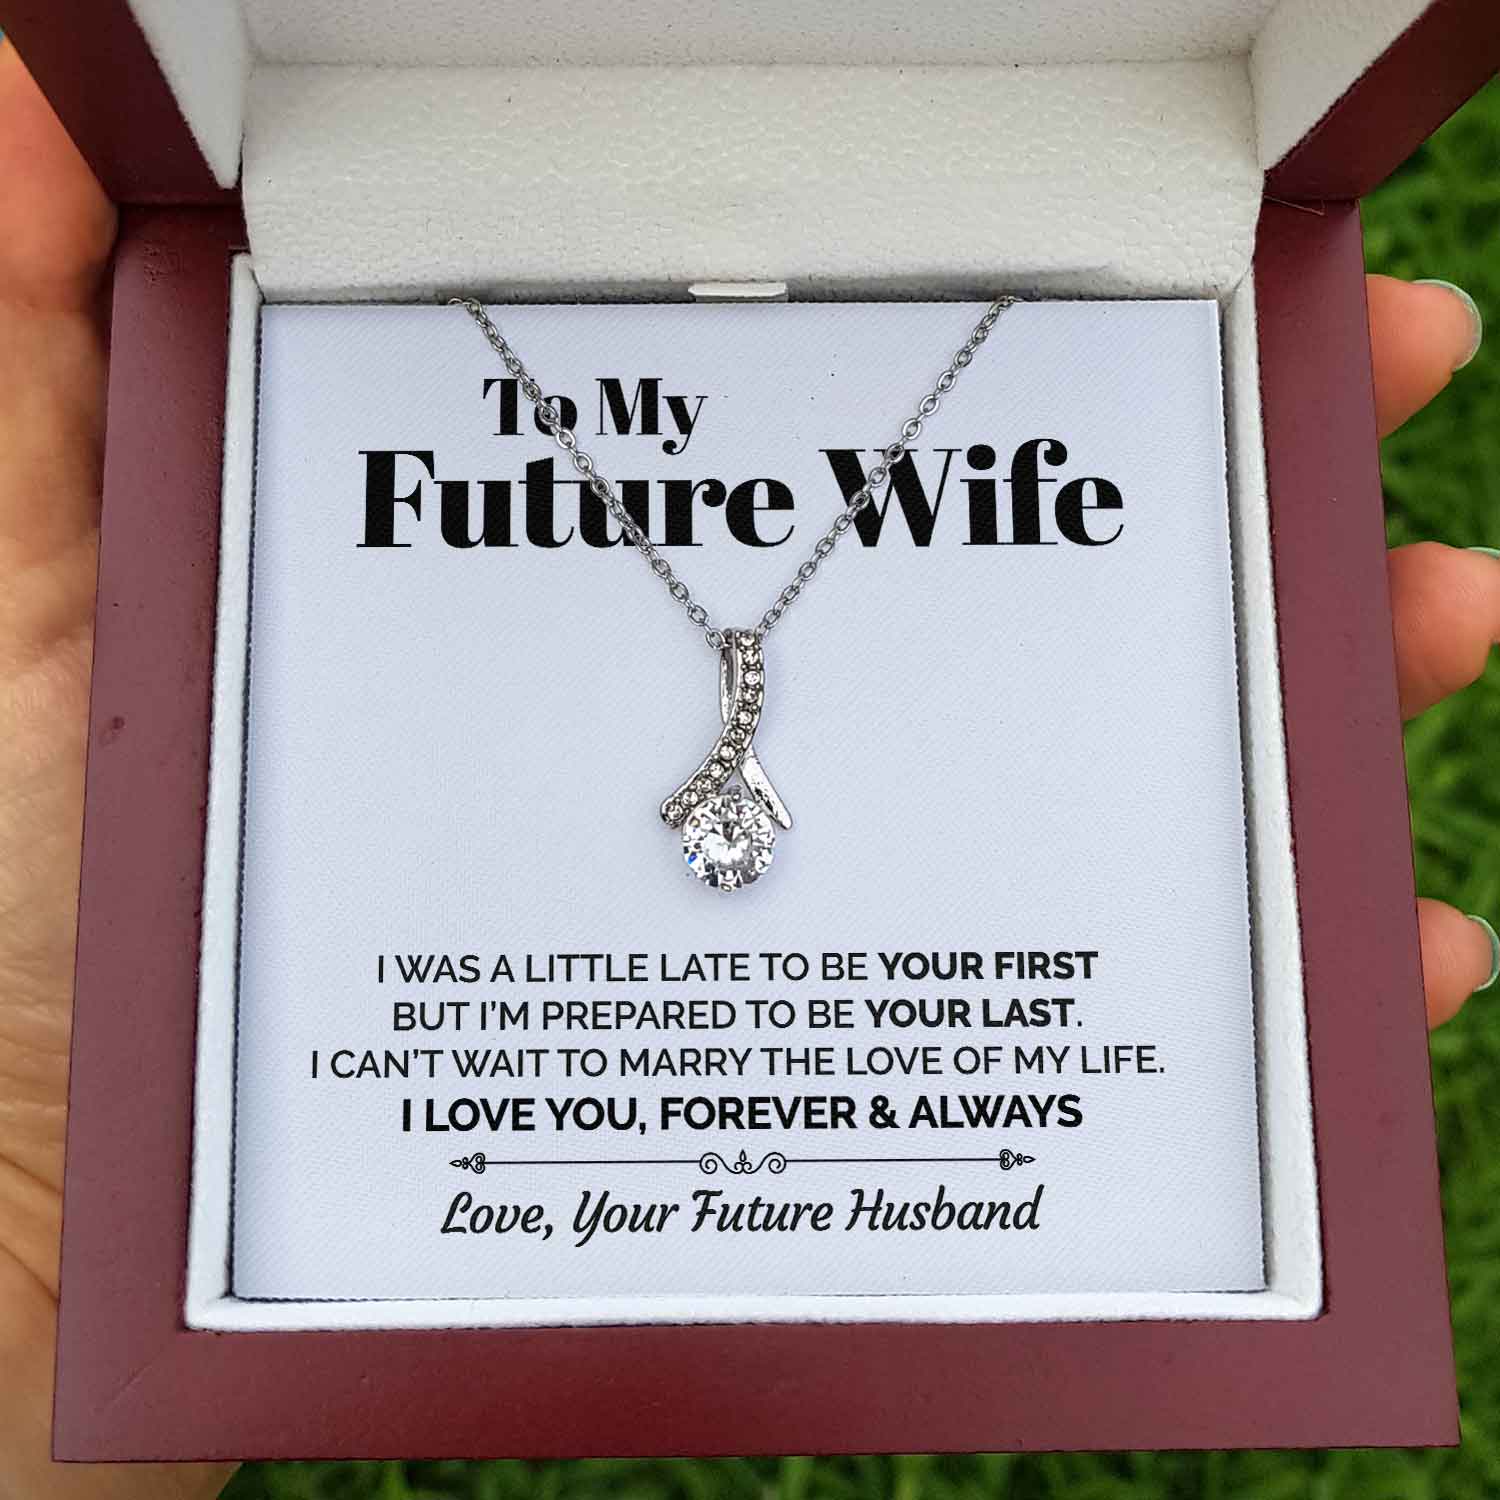 ShineOn Fulfillment Jewelry Standard Box To My Future Wife - I Was A Little Late To Be Your First - Ribbon Necklace